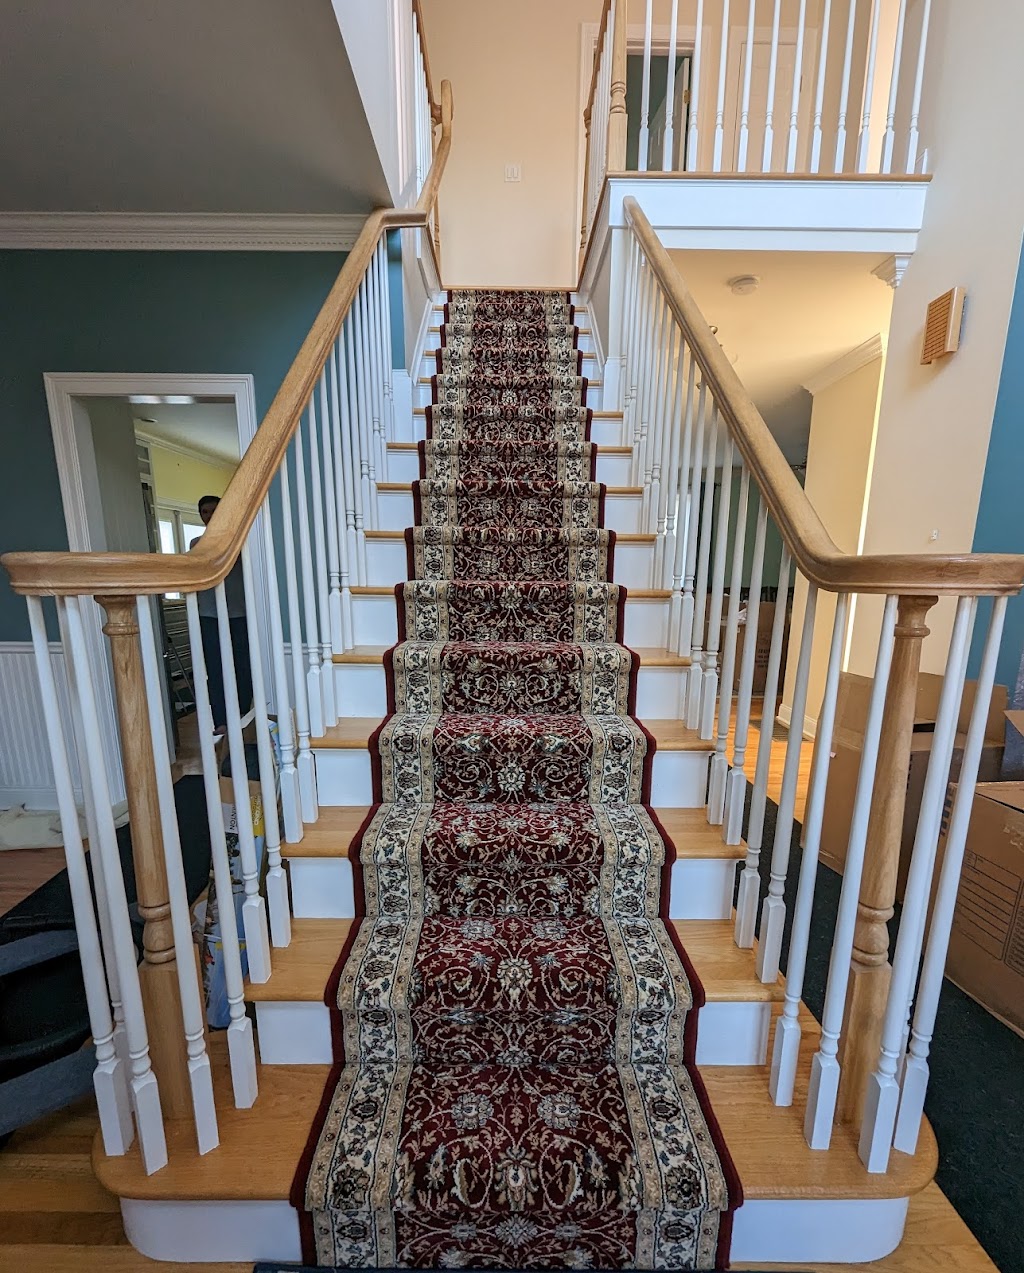 The Carpet Connection | 215 Isinglass Rd, Shelton, CT 06484 | Phone: (203) 926-1436